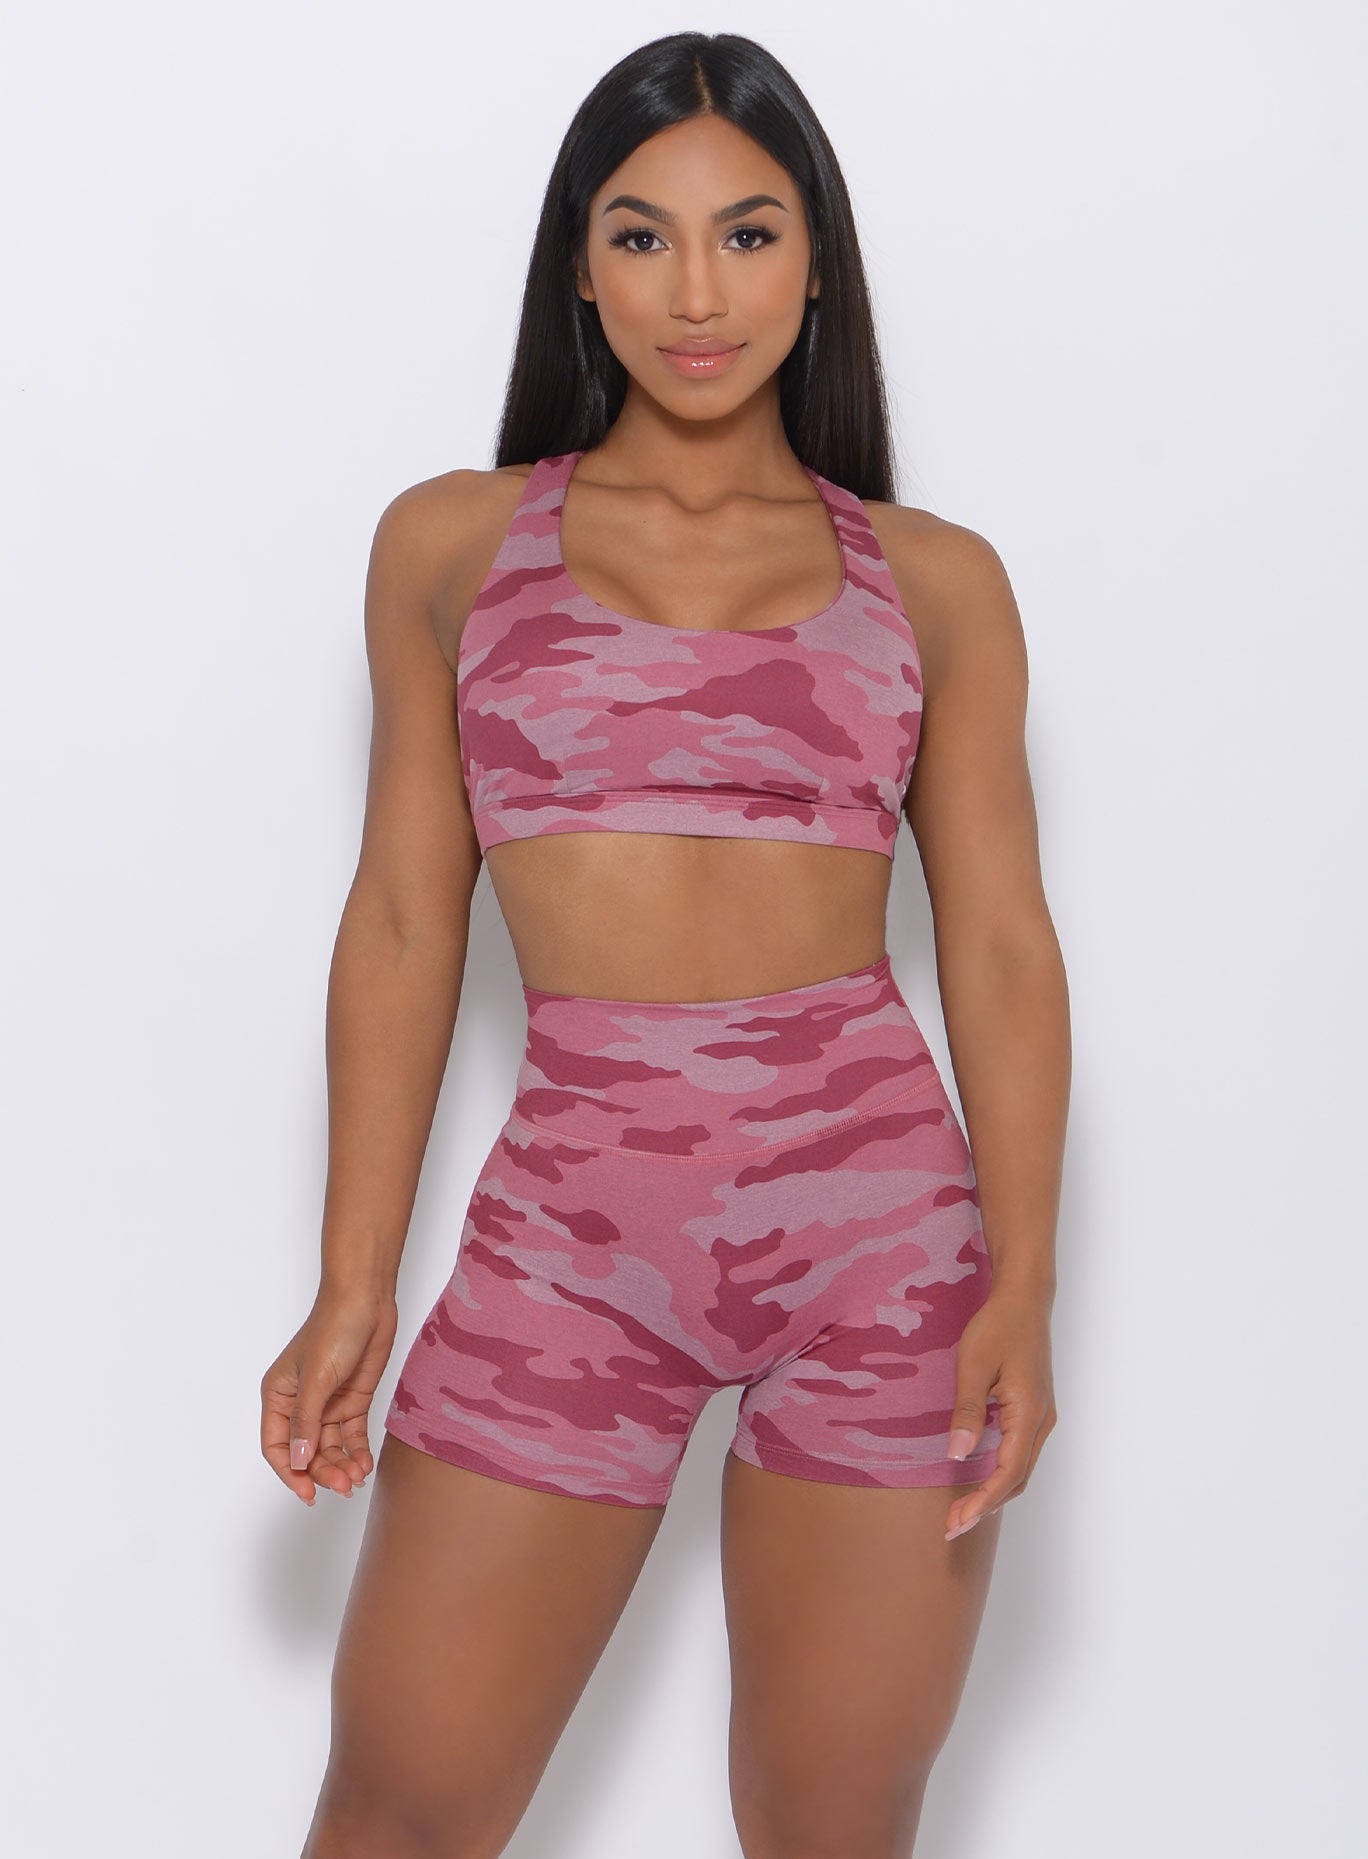 Front view of the model  wearing our Fit Camo Shorts in hibiscus camo color and a matching bra 